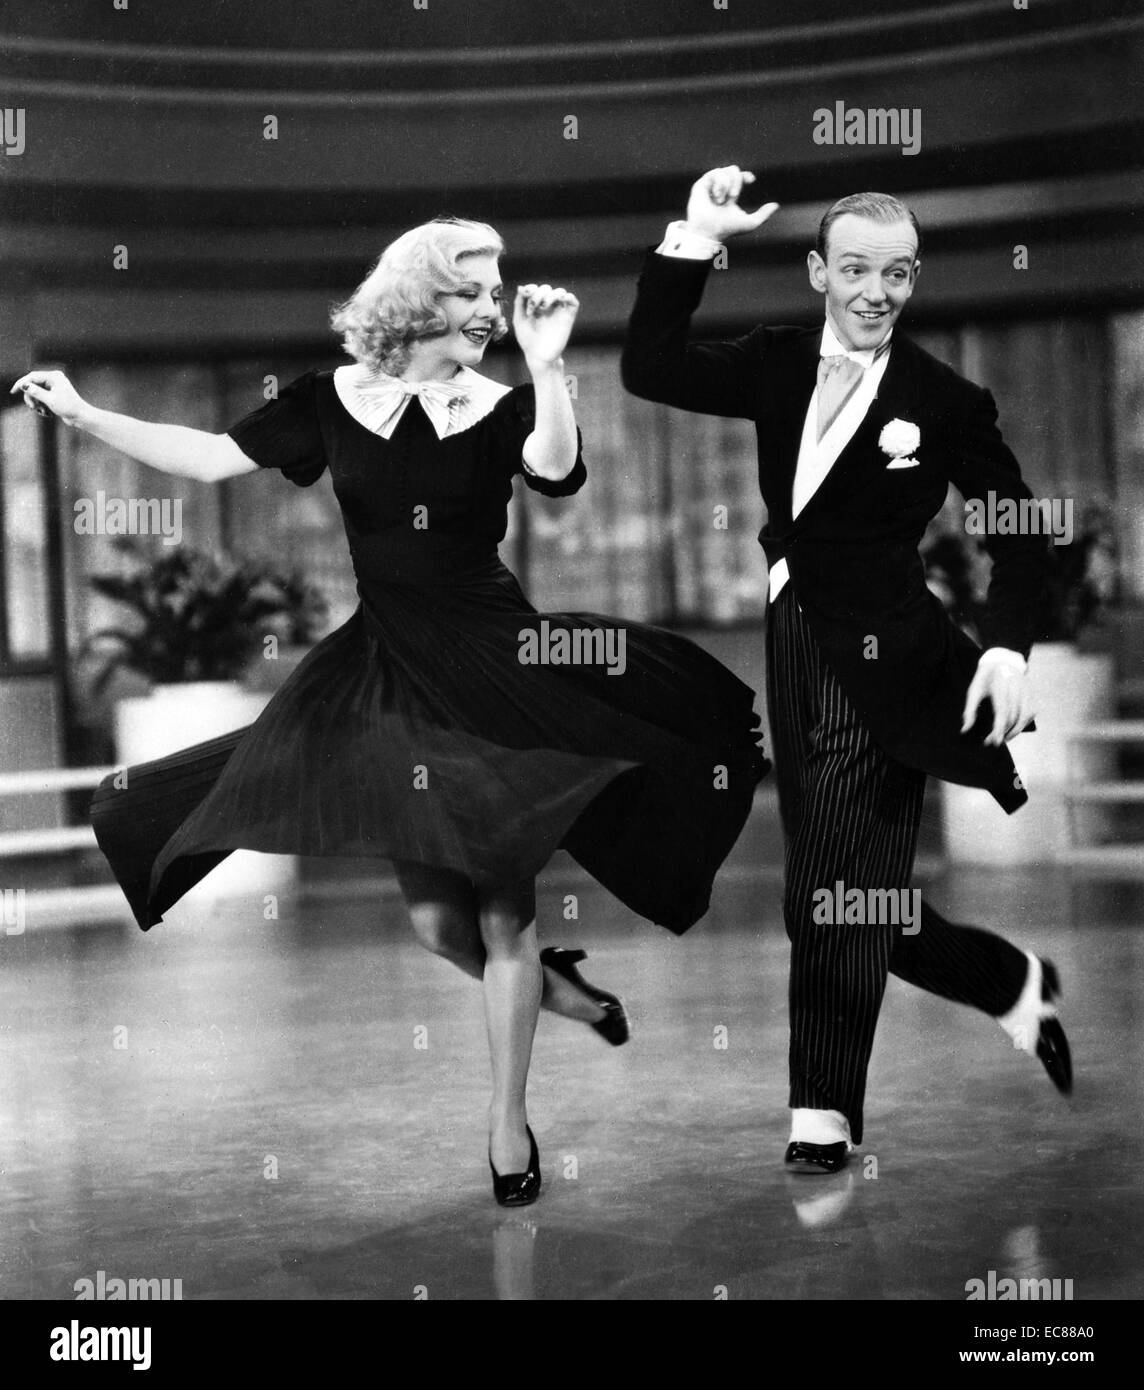 Still from the film 'Swing Time' an American romantic musical comedy set in New York City. Starring Ginger Rogers and Fred Astaire. Dated 1936 Stock Photo